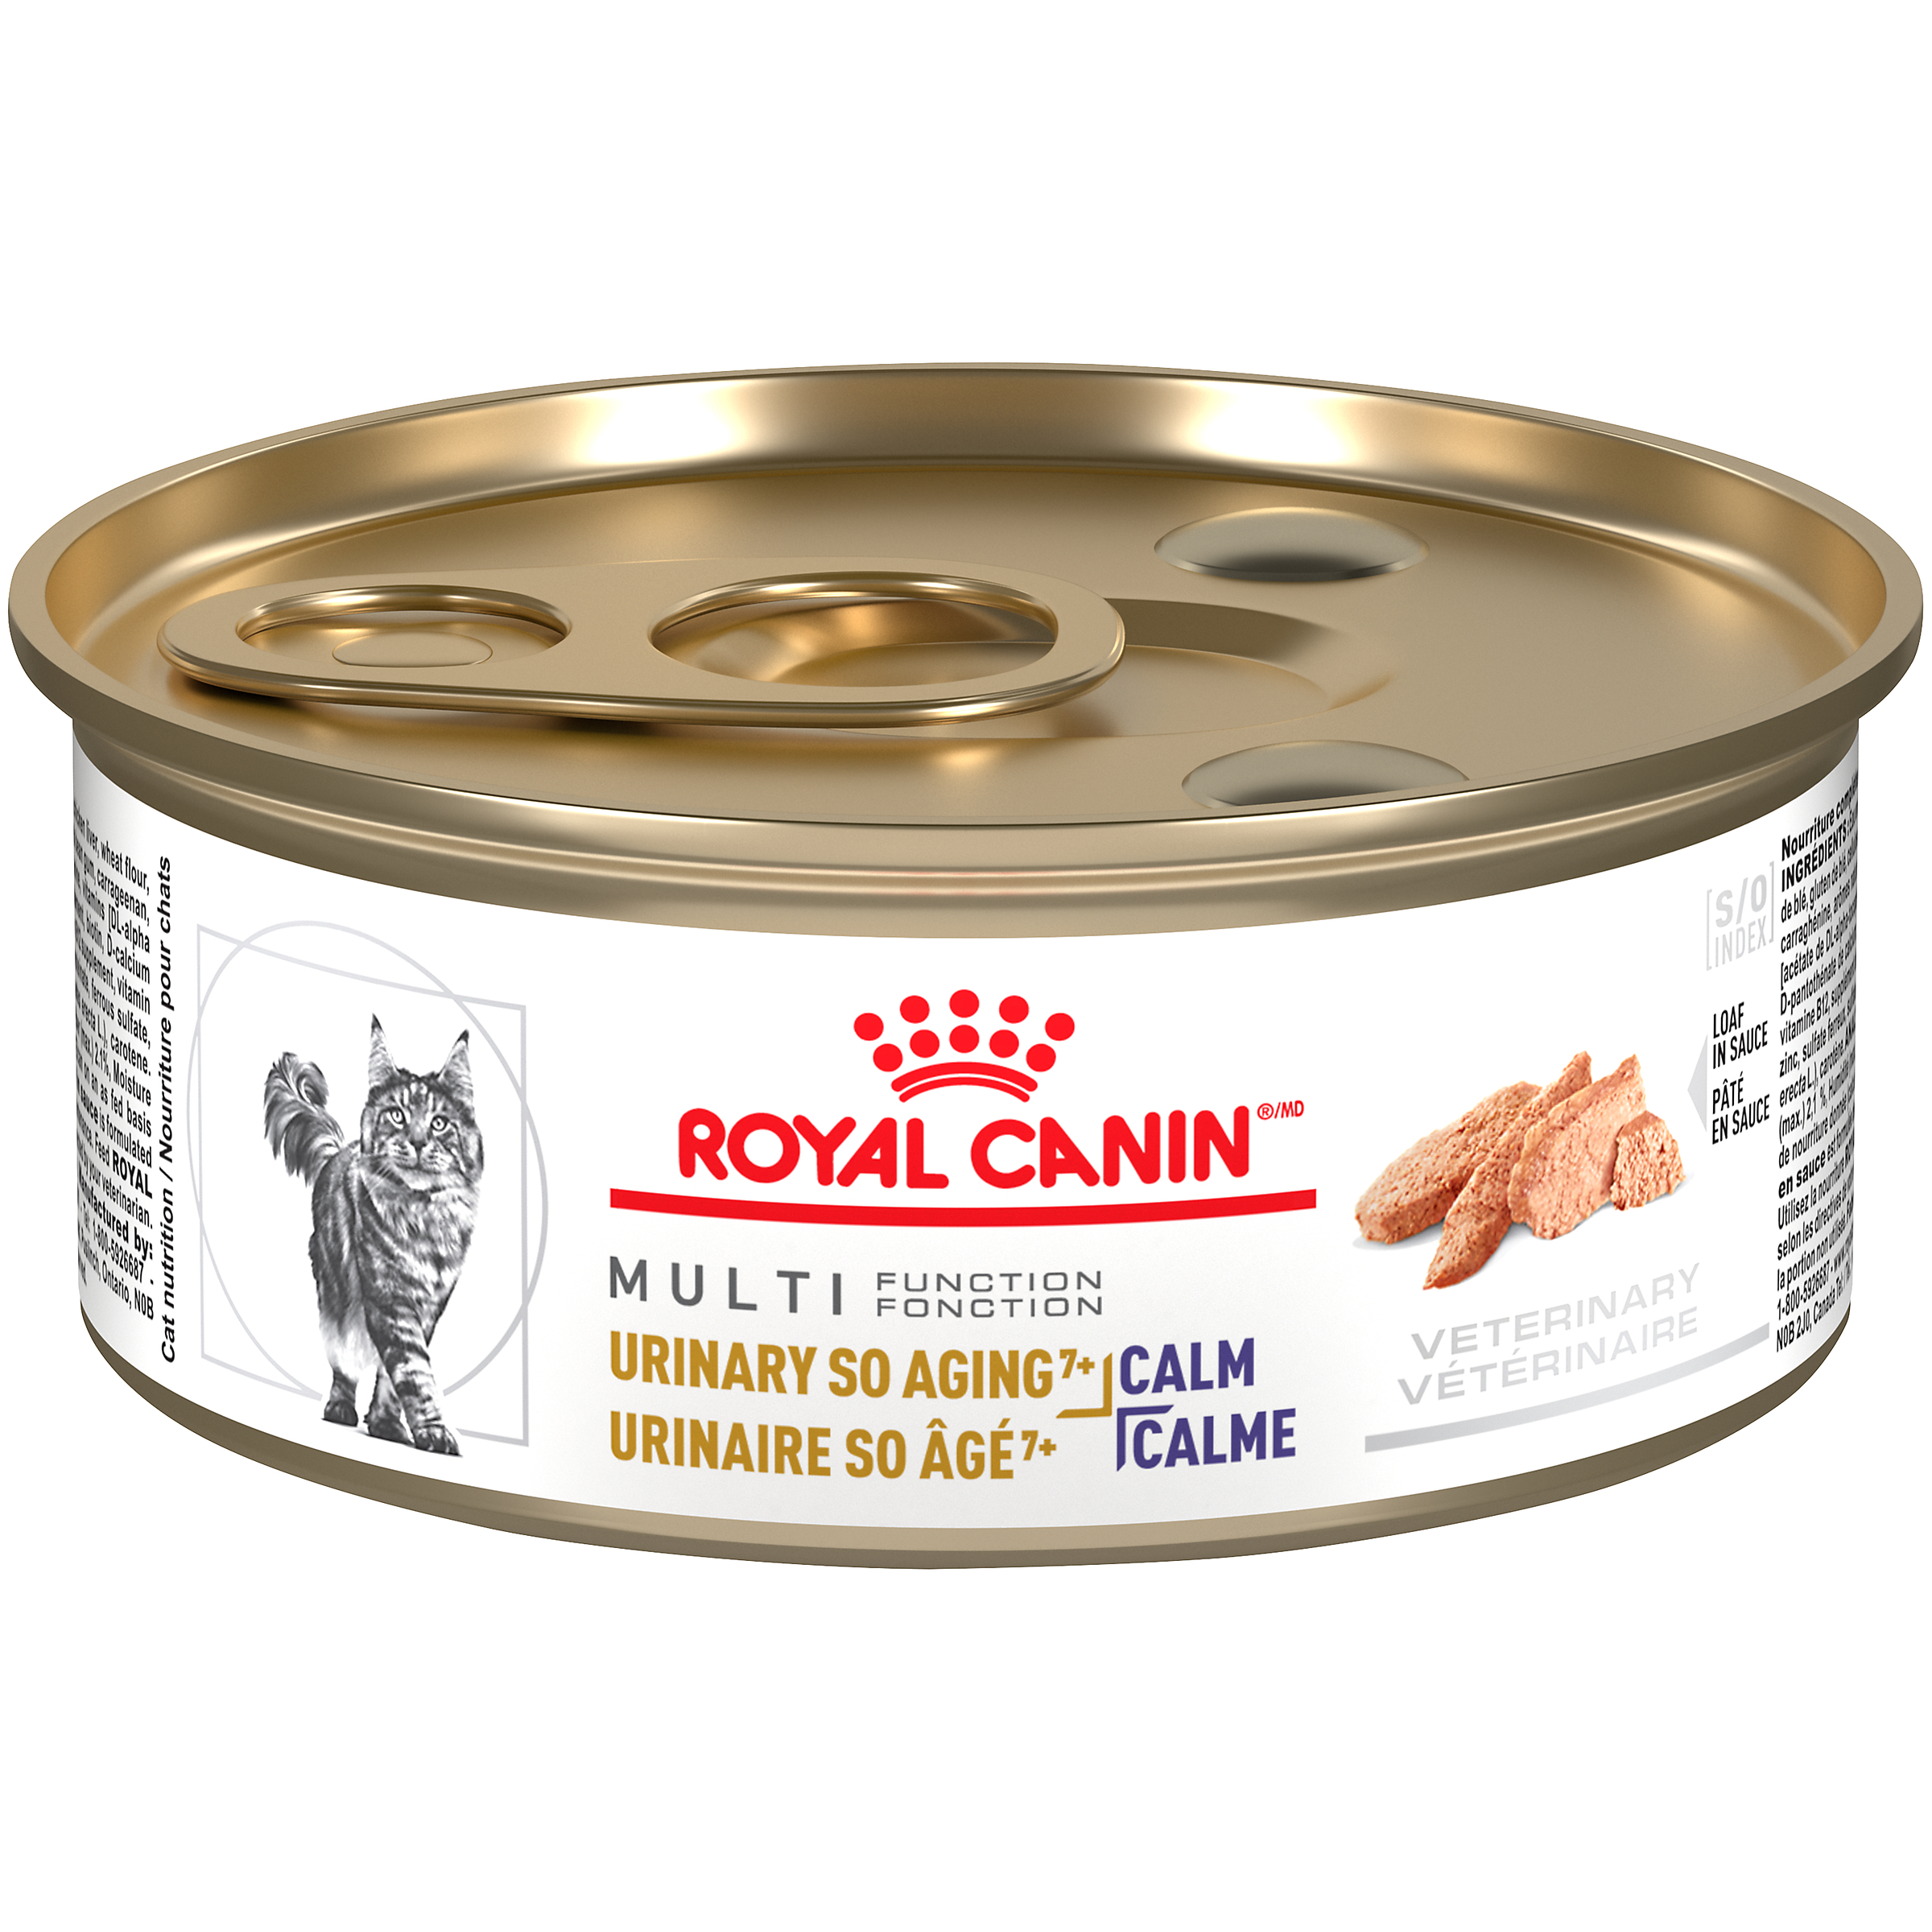 Feline Urinary SO® Aging7+ + Calm Canned Cat Food